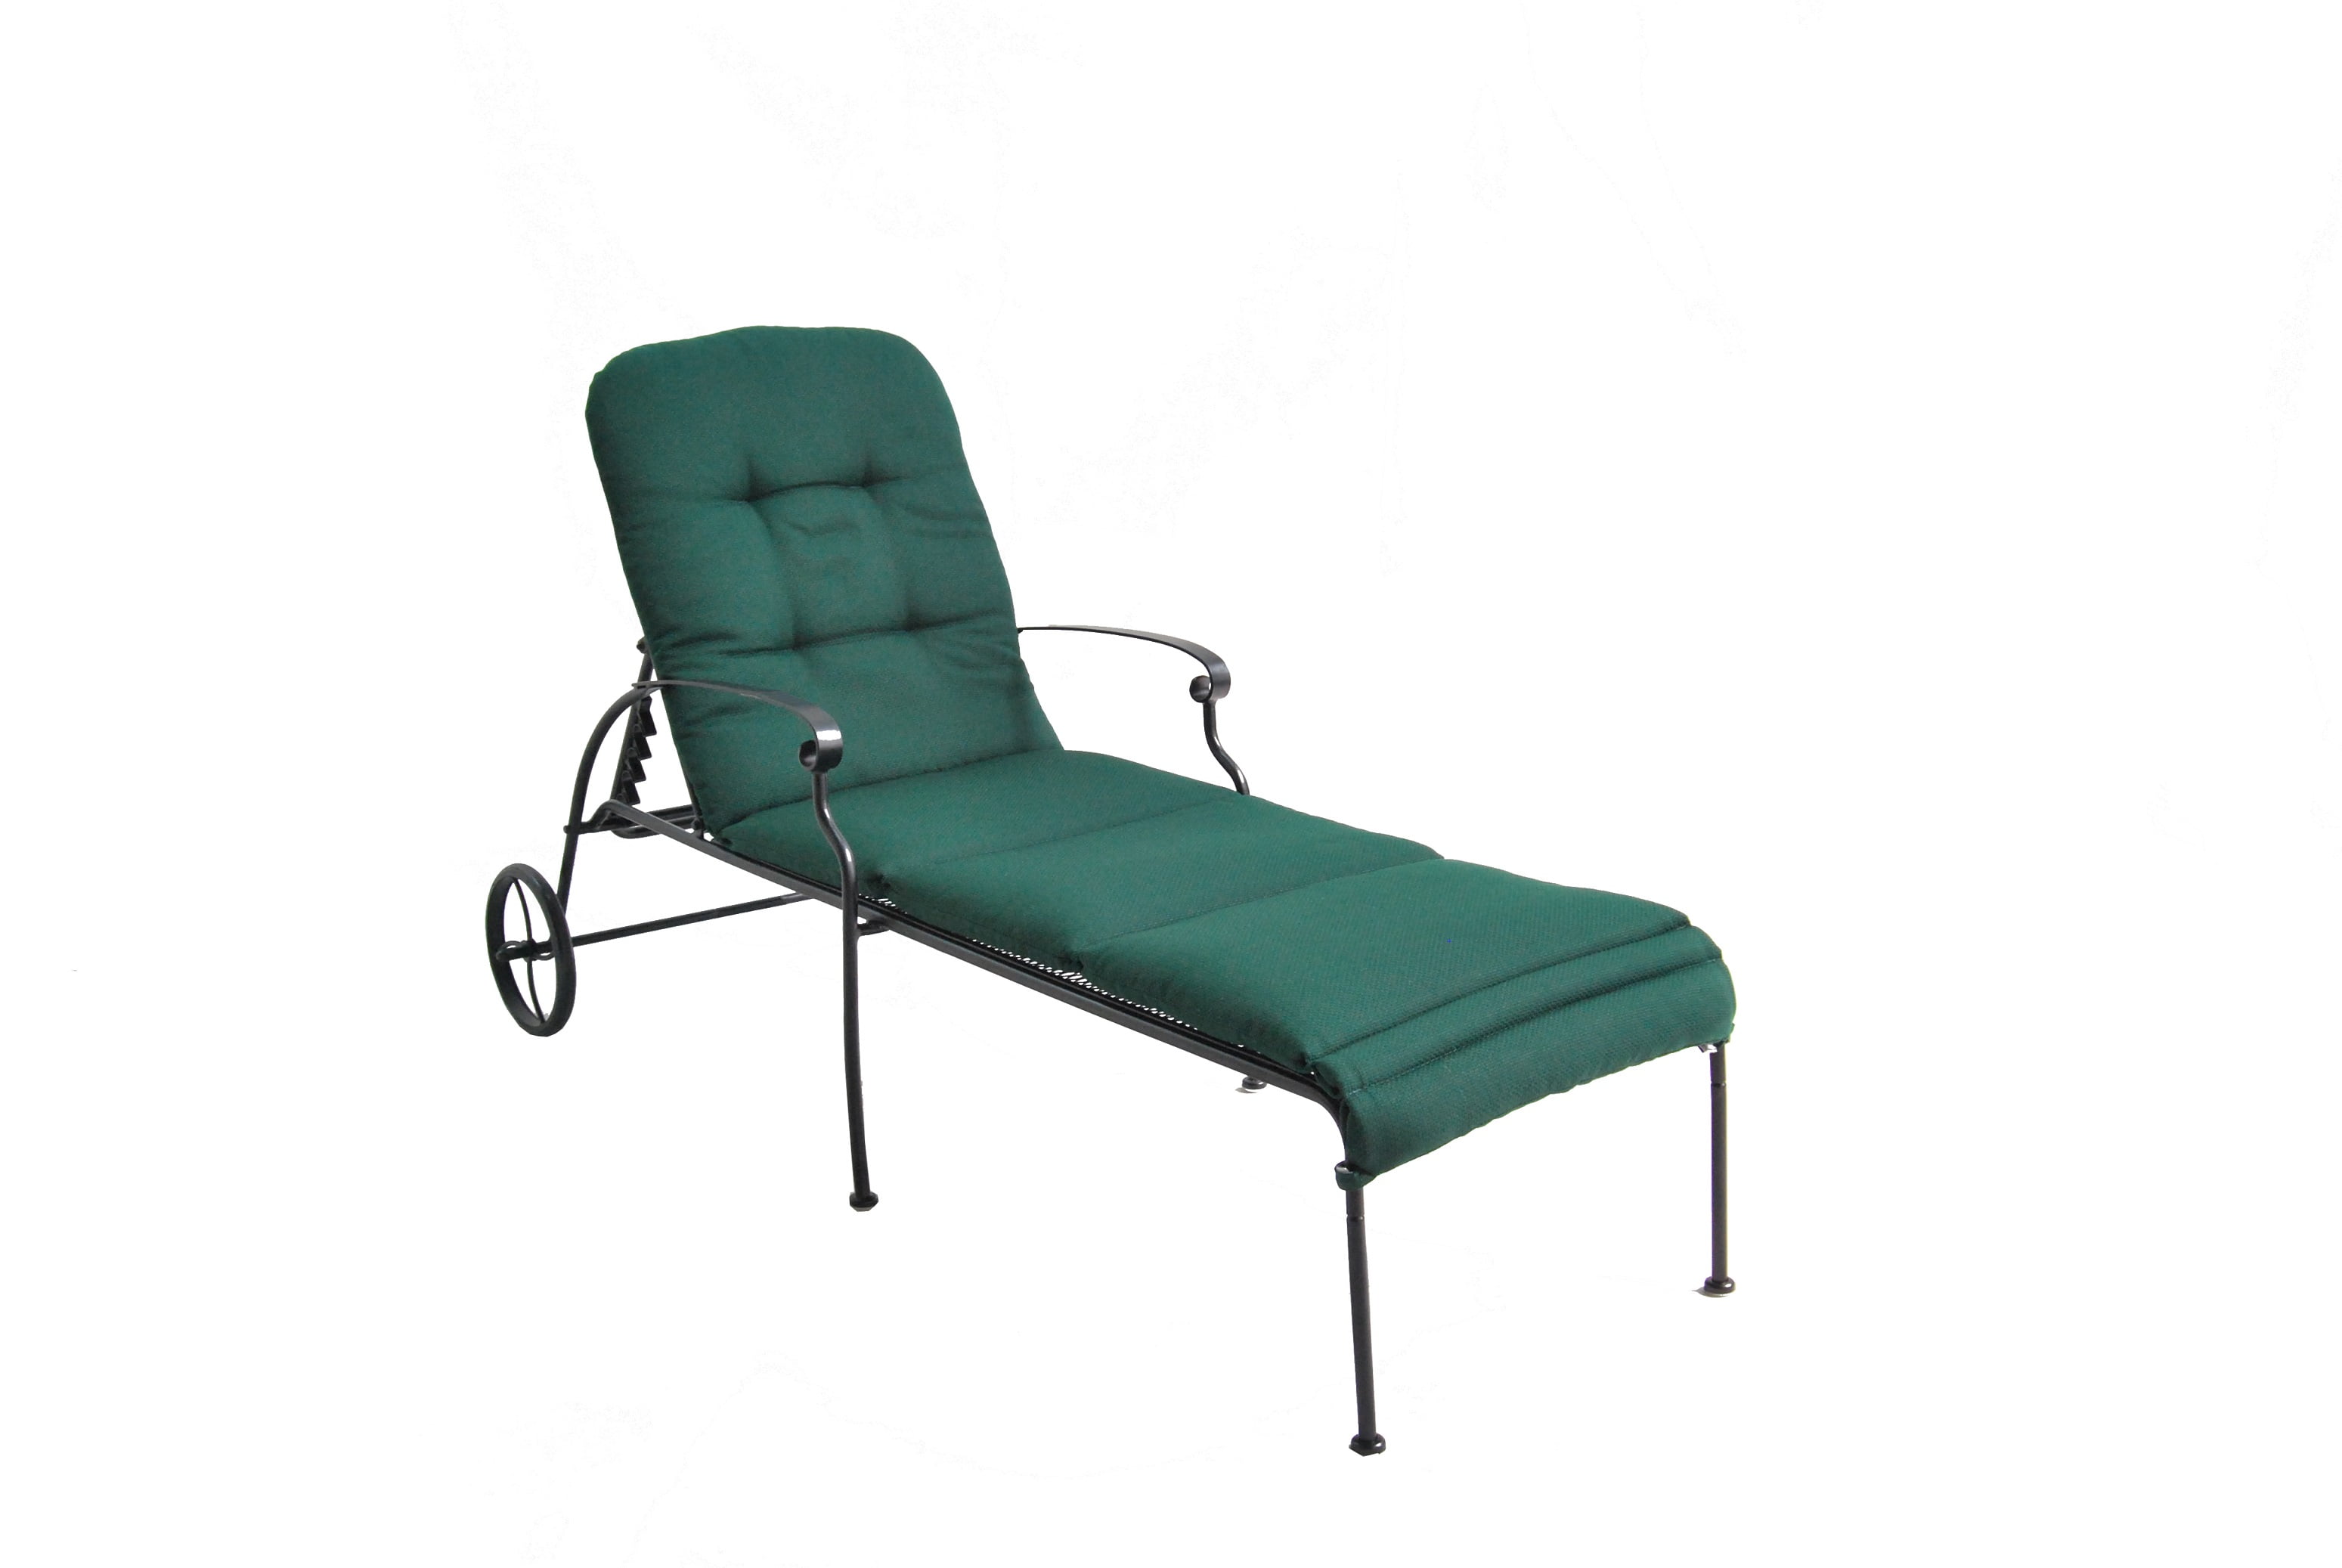 Better Homes And Gardens Clayton Court Metal Chaise Lounge With Wheels Green Walmart Com Walmart Com